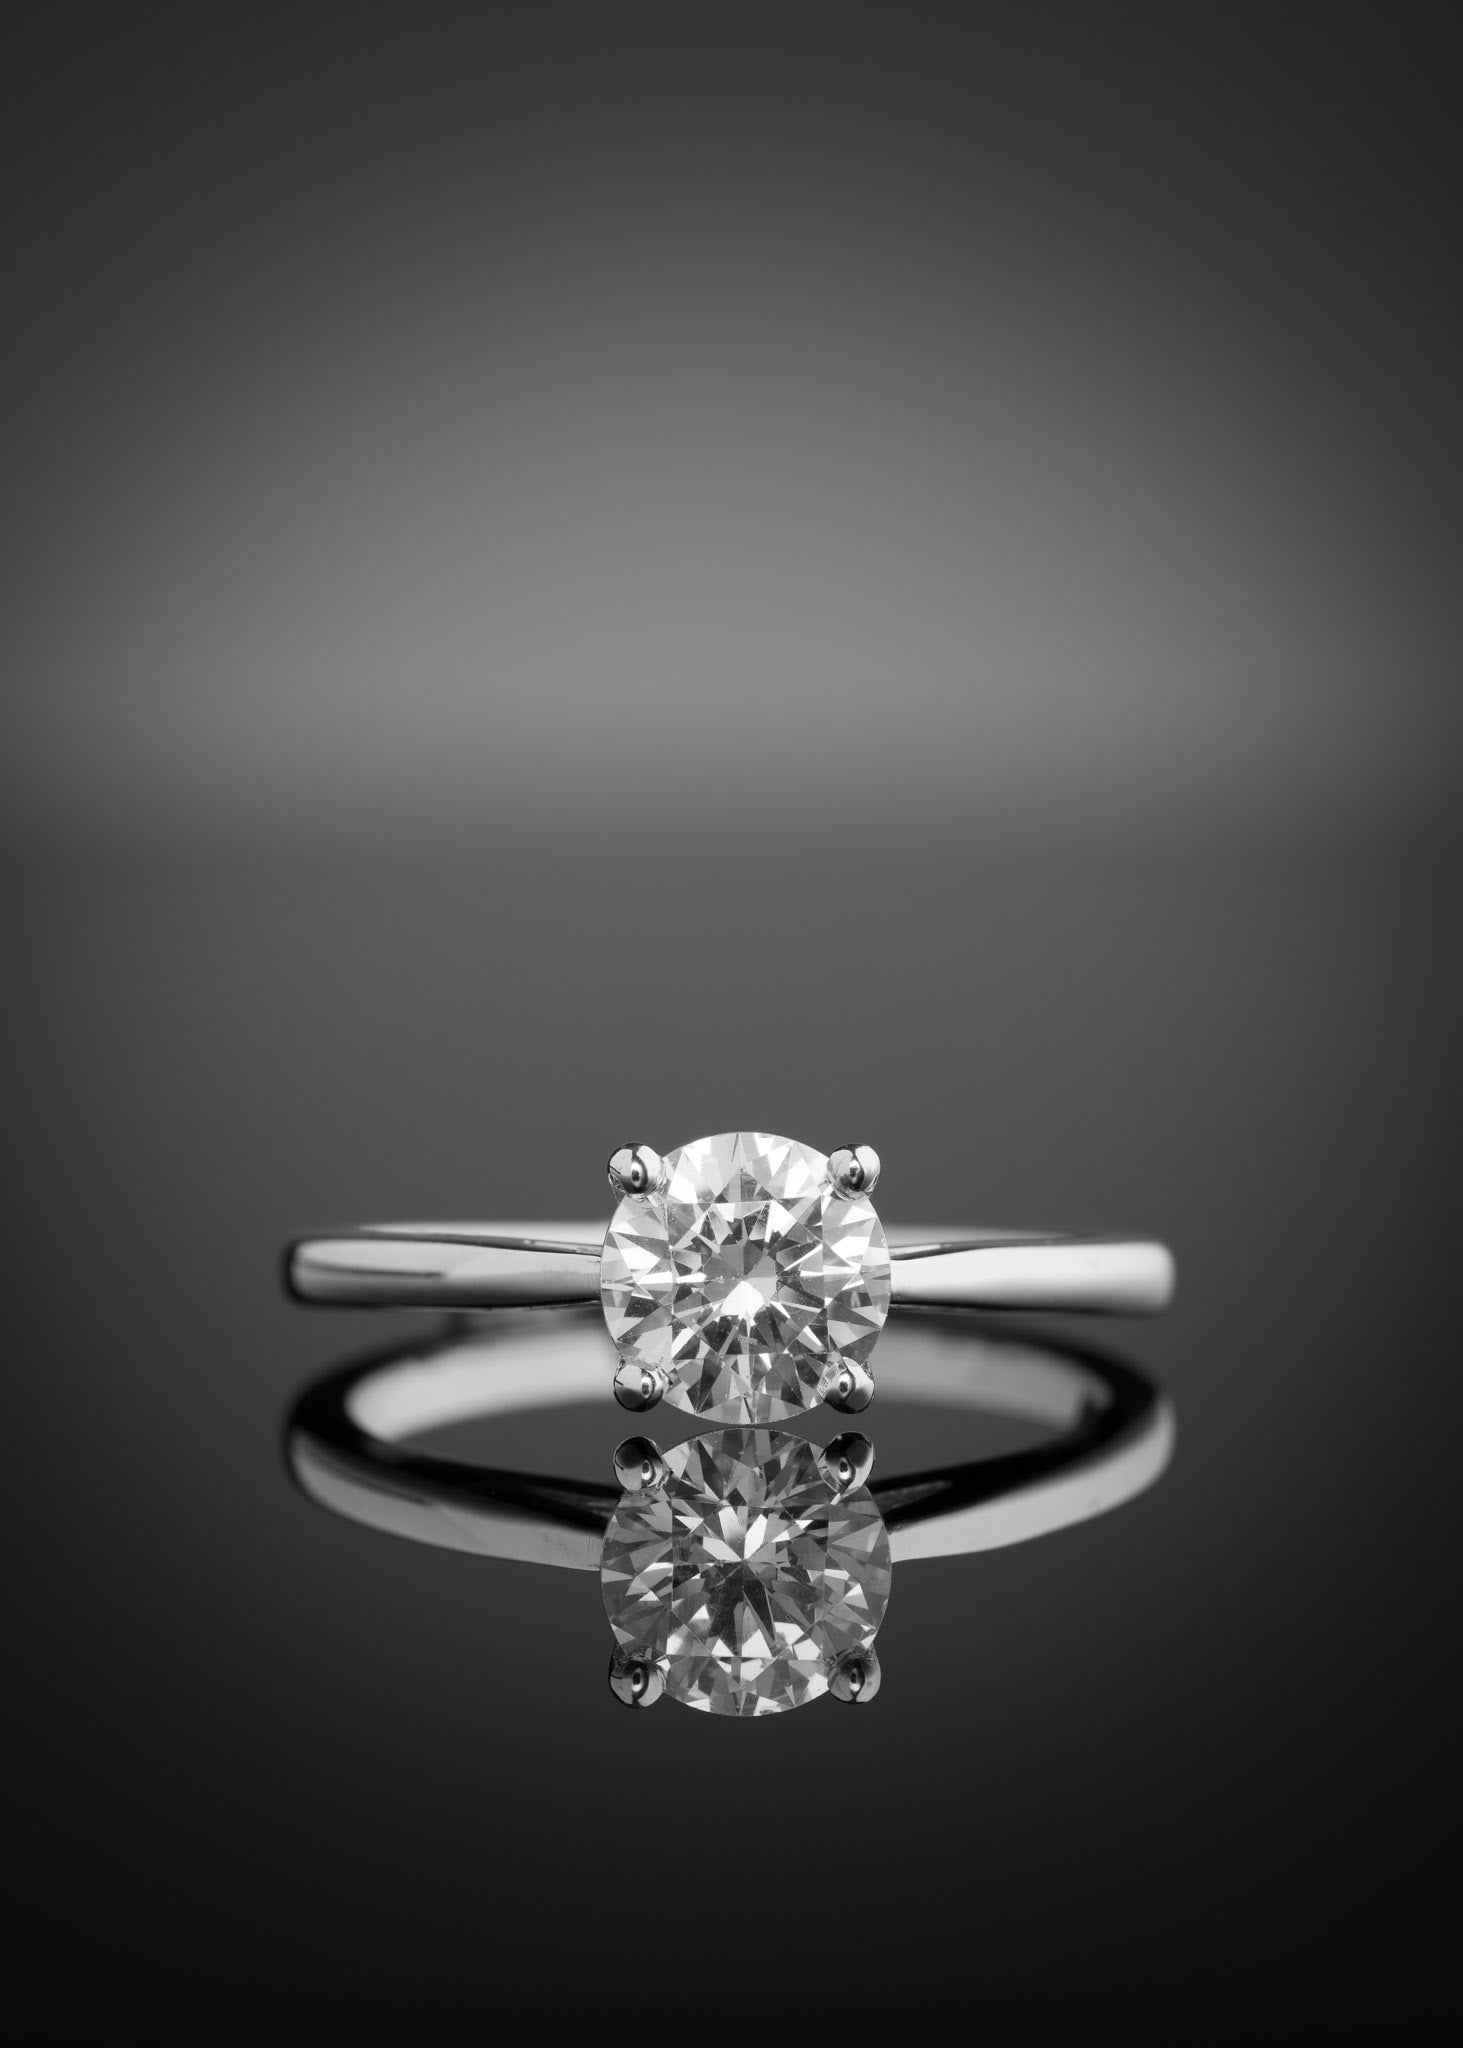 Diamond Engagement Ring with Claddagh setting